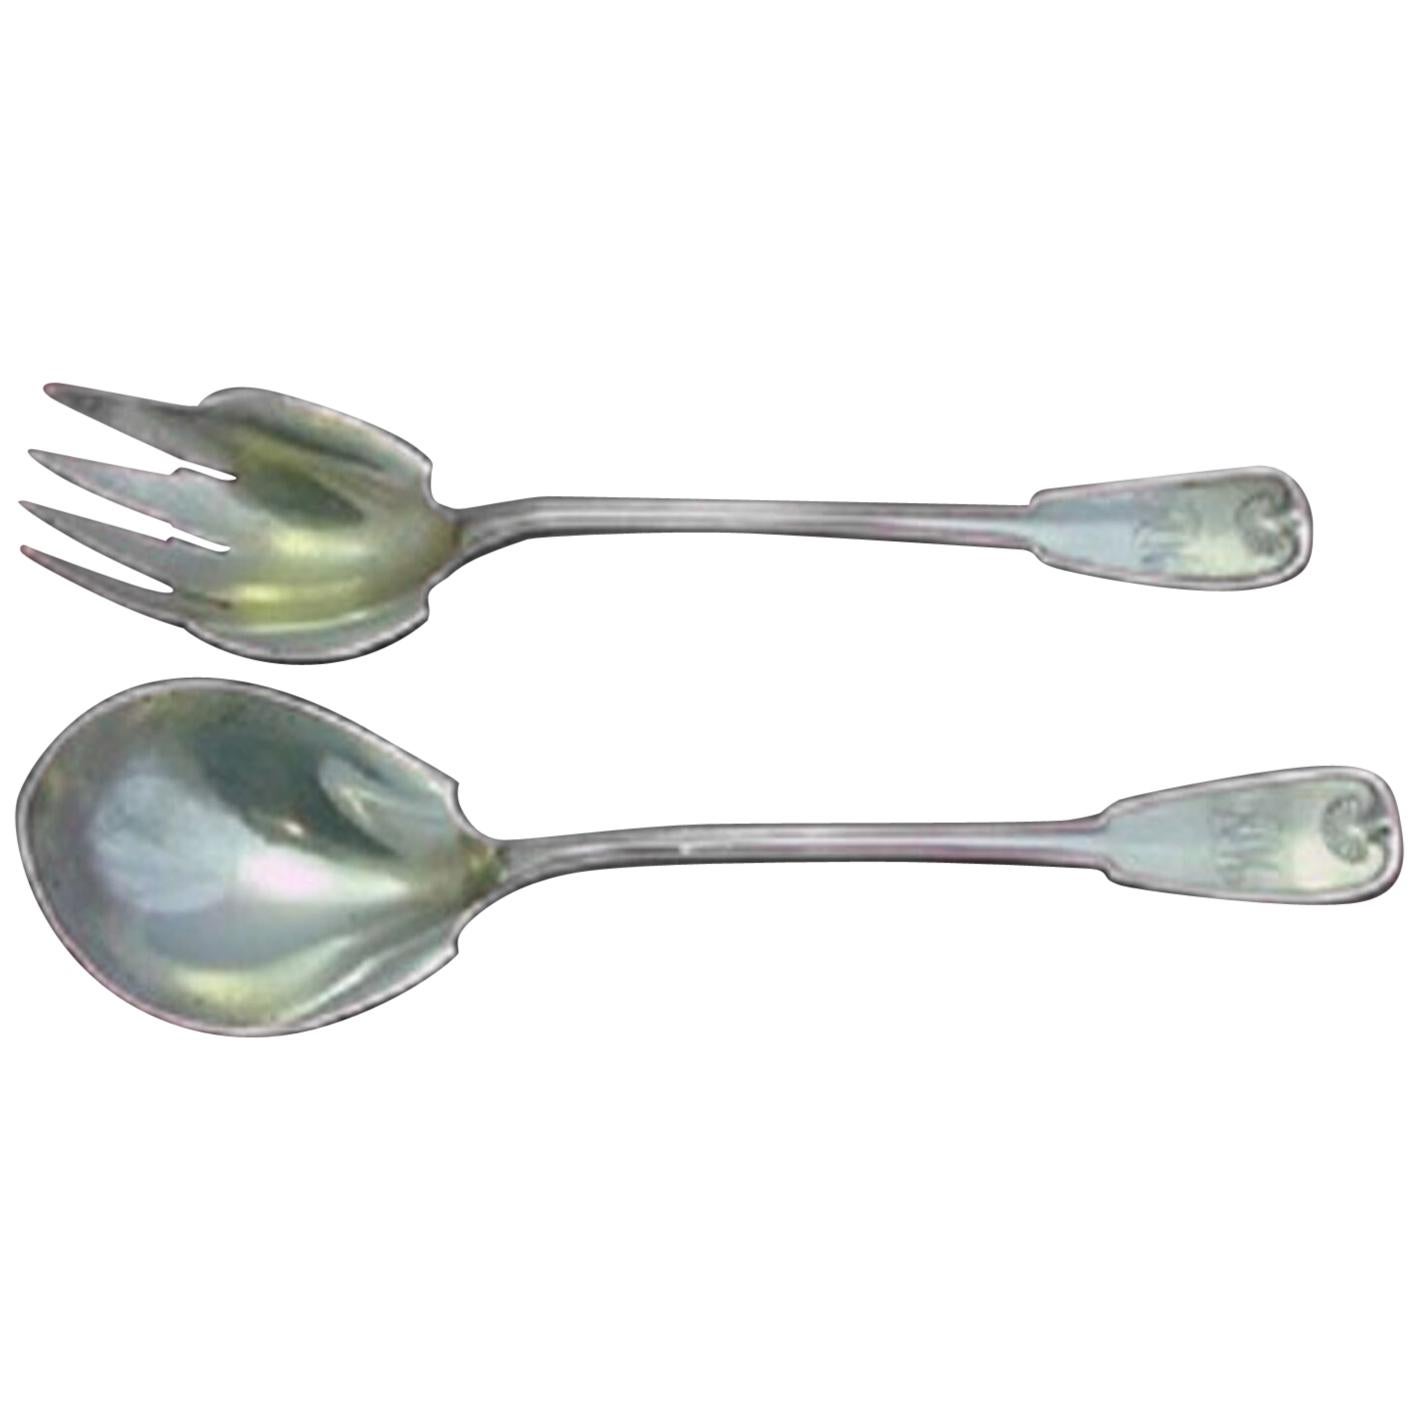 Palm By Tiffany Sterling Silver Salad Serving Set 2pc